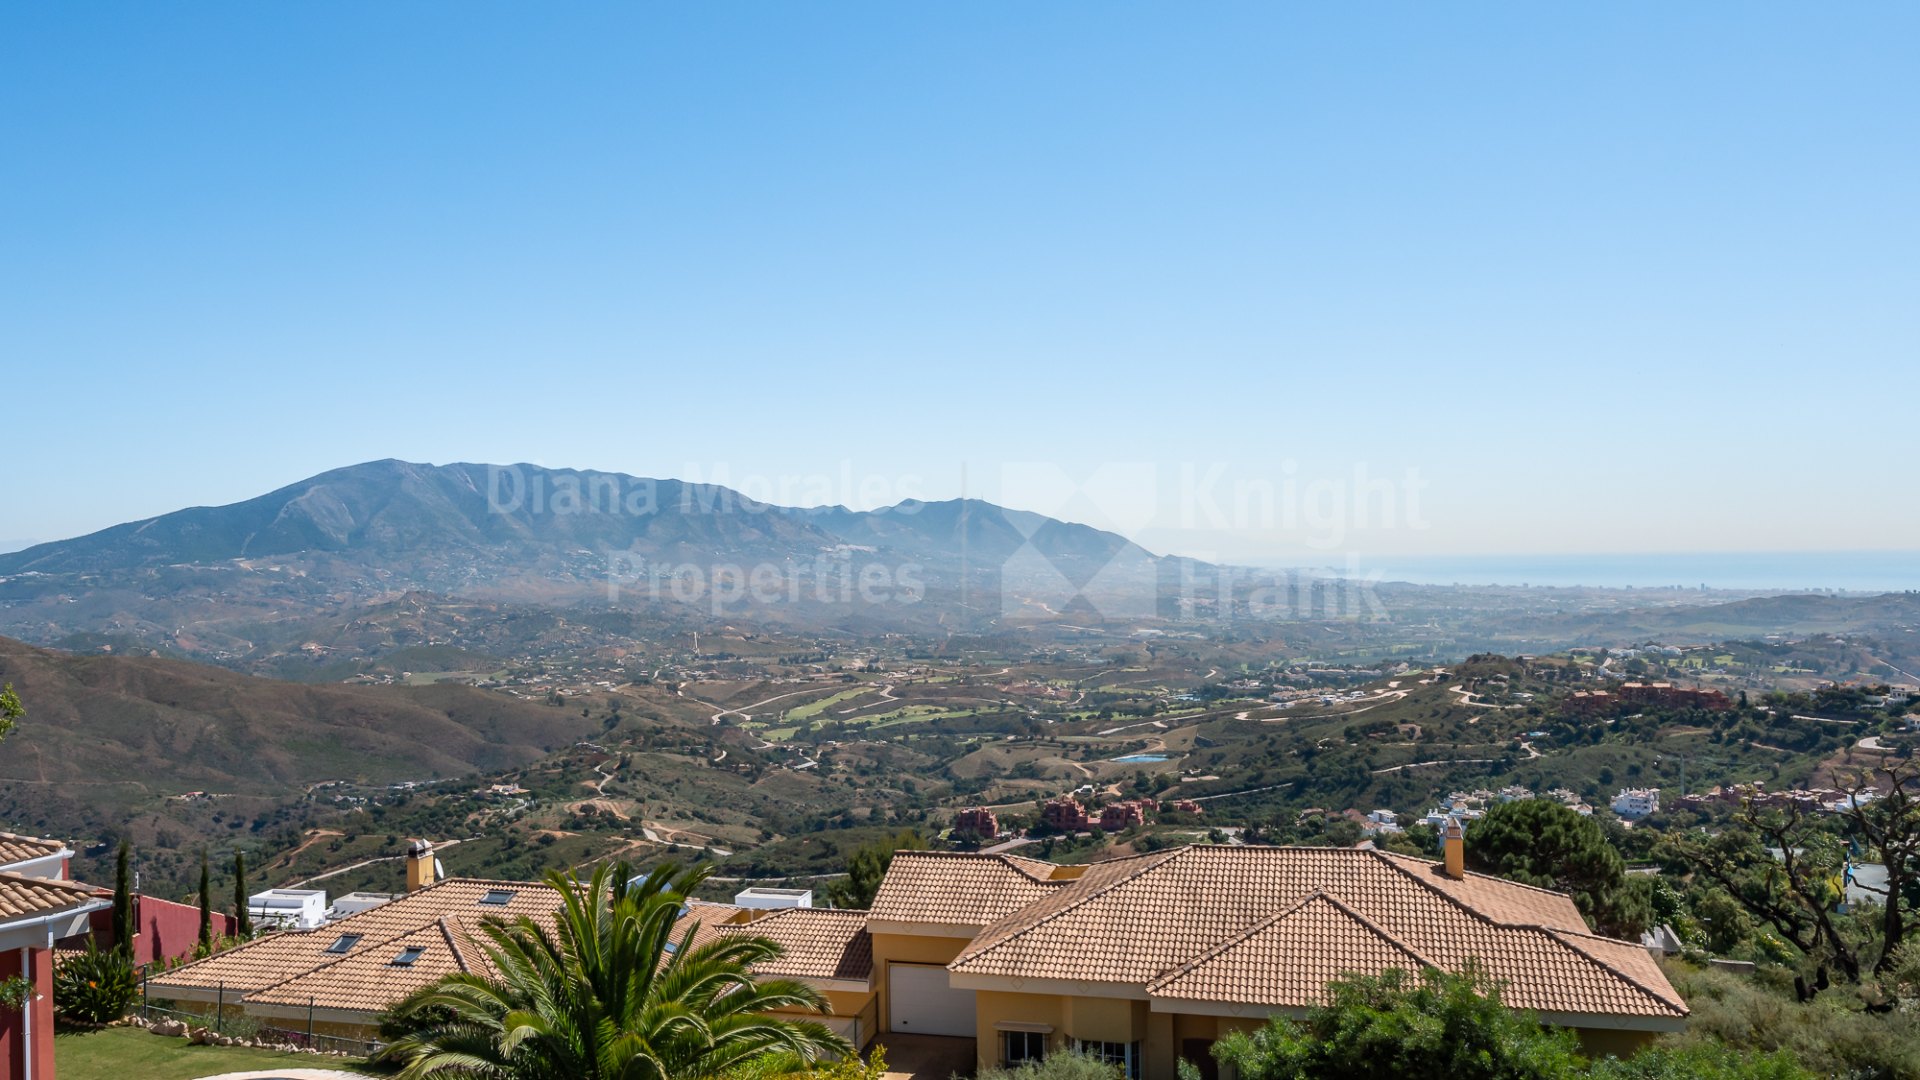 Oakhill Heights in La Mairena Ojén is an exquisite enclave with privileged views